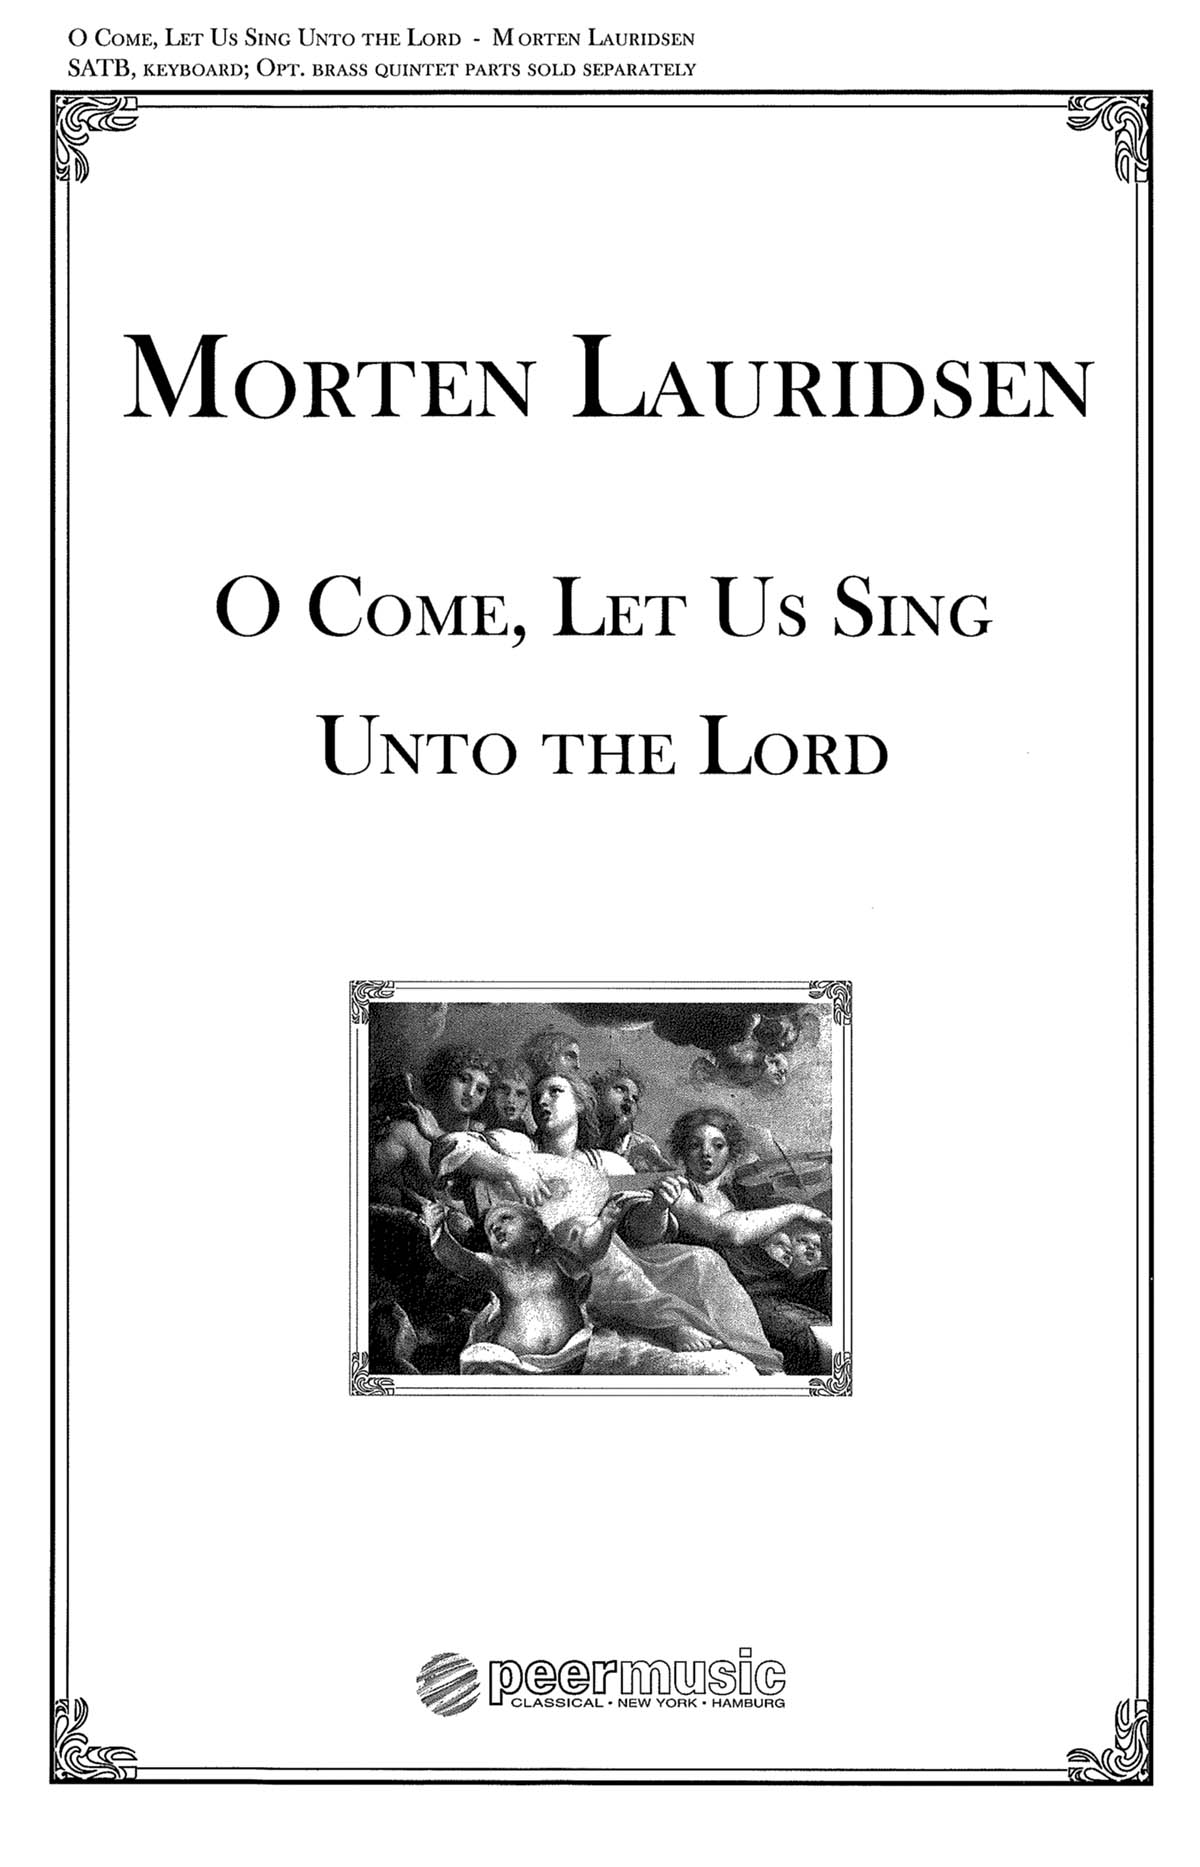 O Come, Let Us Sing unto the Lord